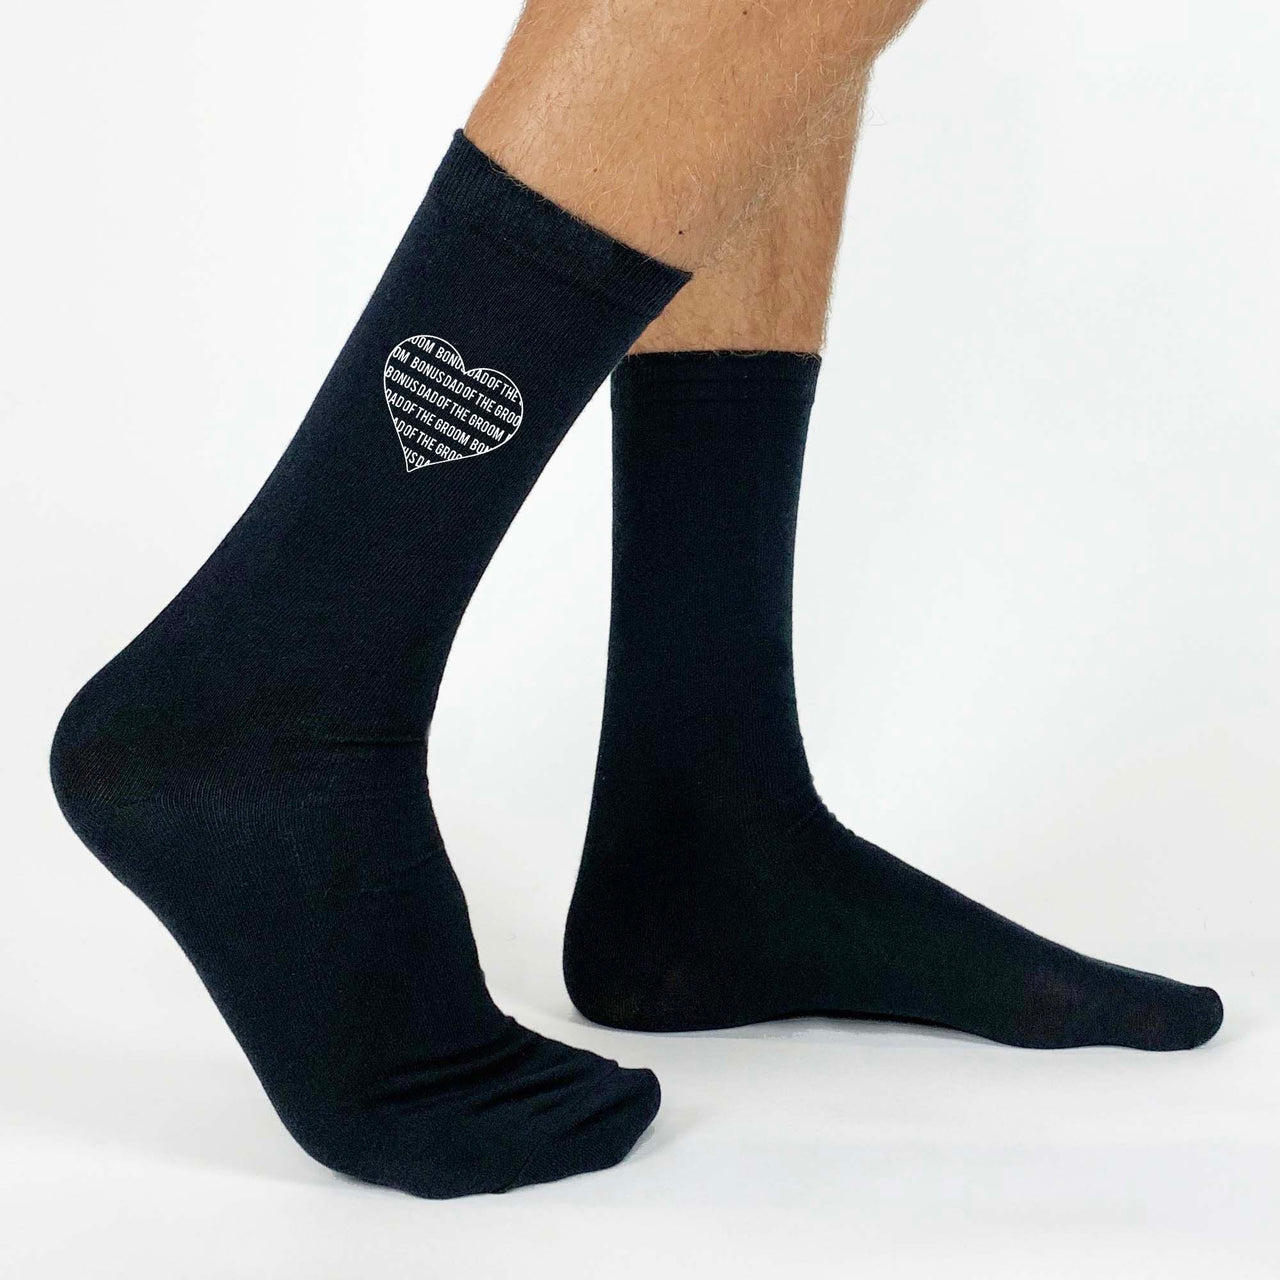 Brother of the Groom socks with heart design